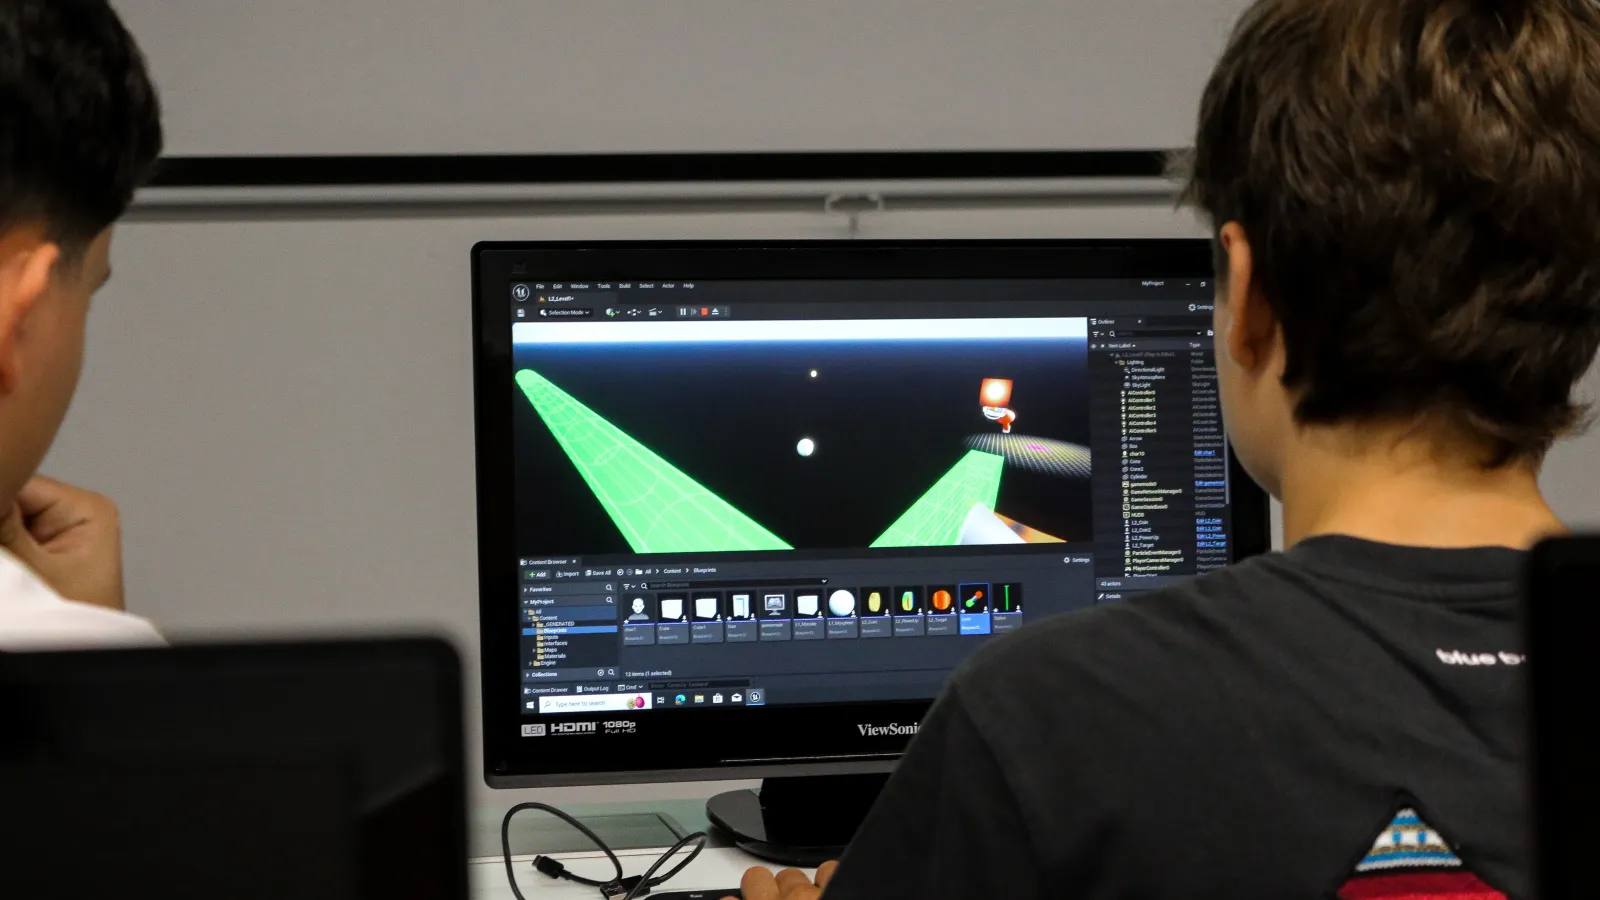 Two students attending the workshop work on the same computer using the Unreal Engine editor. The project shows a dark and laberynthic scenario